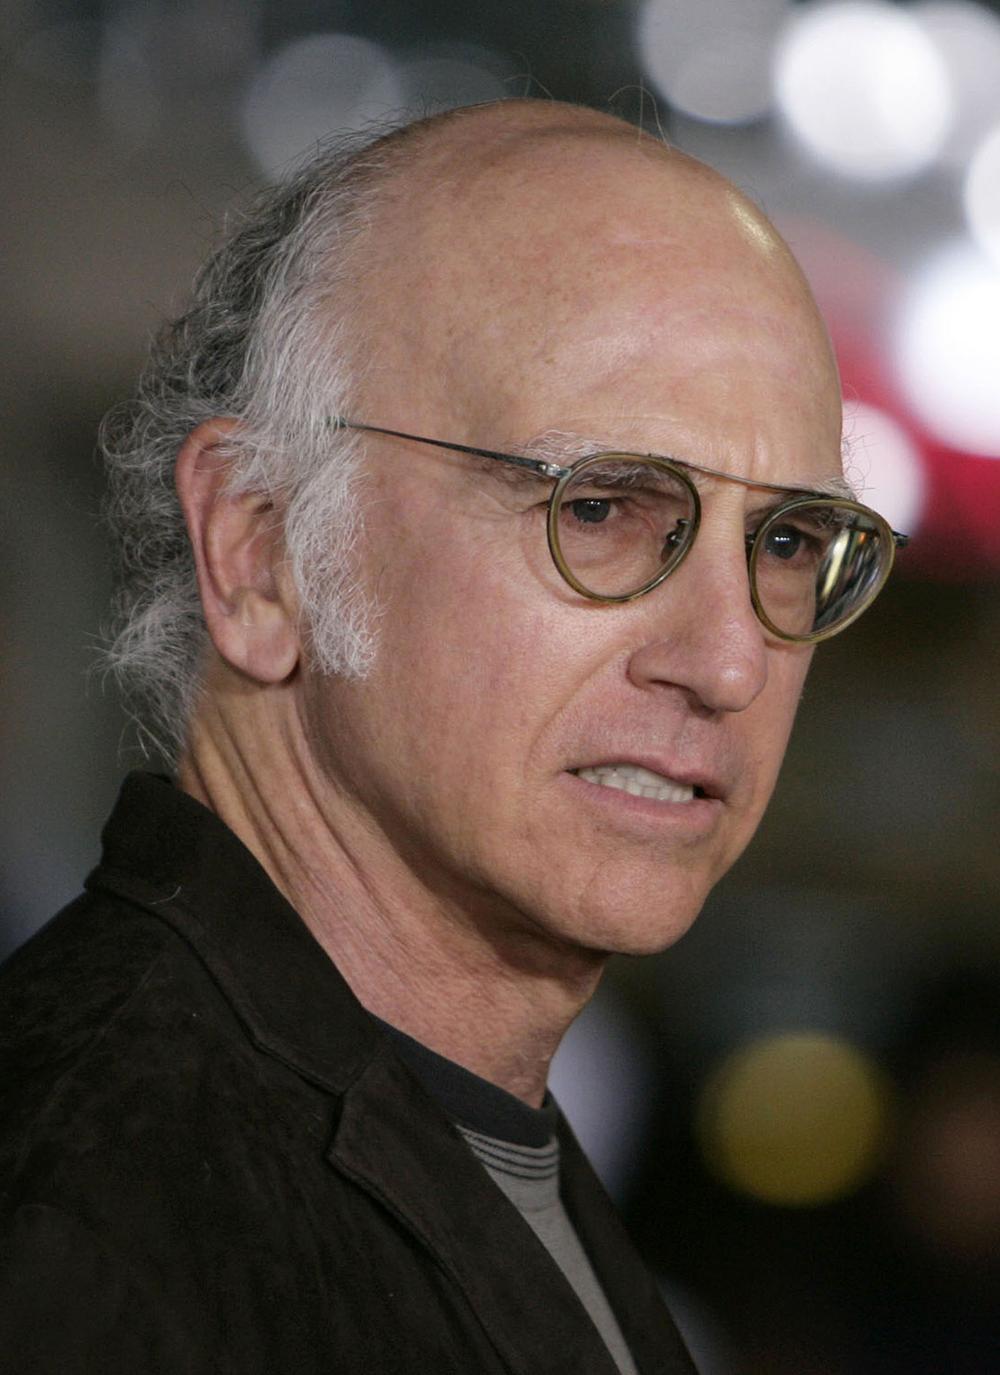 Larry David arrives at the premiere of &quot;The Heartbreak Kid&quot; in Los Angeles on in this Sept. 27, 2007, file photo. David's &quot;Curb Your Enthusiasm&quot; episode which aired, Sunday, Oct. 21, 2007, was a classic case of art imitating life. On the show, David's fictional spouse, played by Cheryl Hines, left him, an obvious mirror to David's real-life divorce.  (AP)